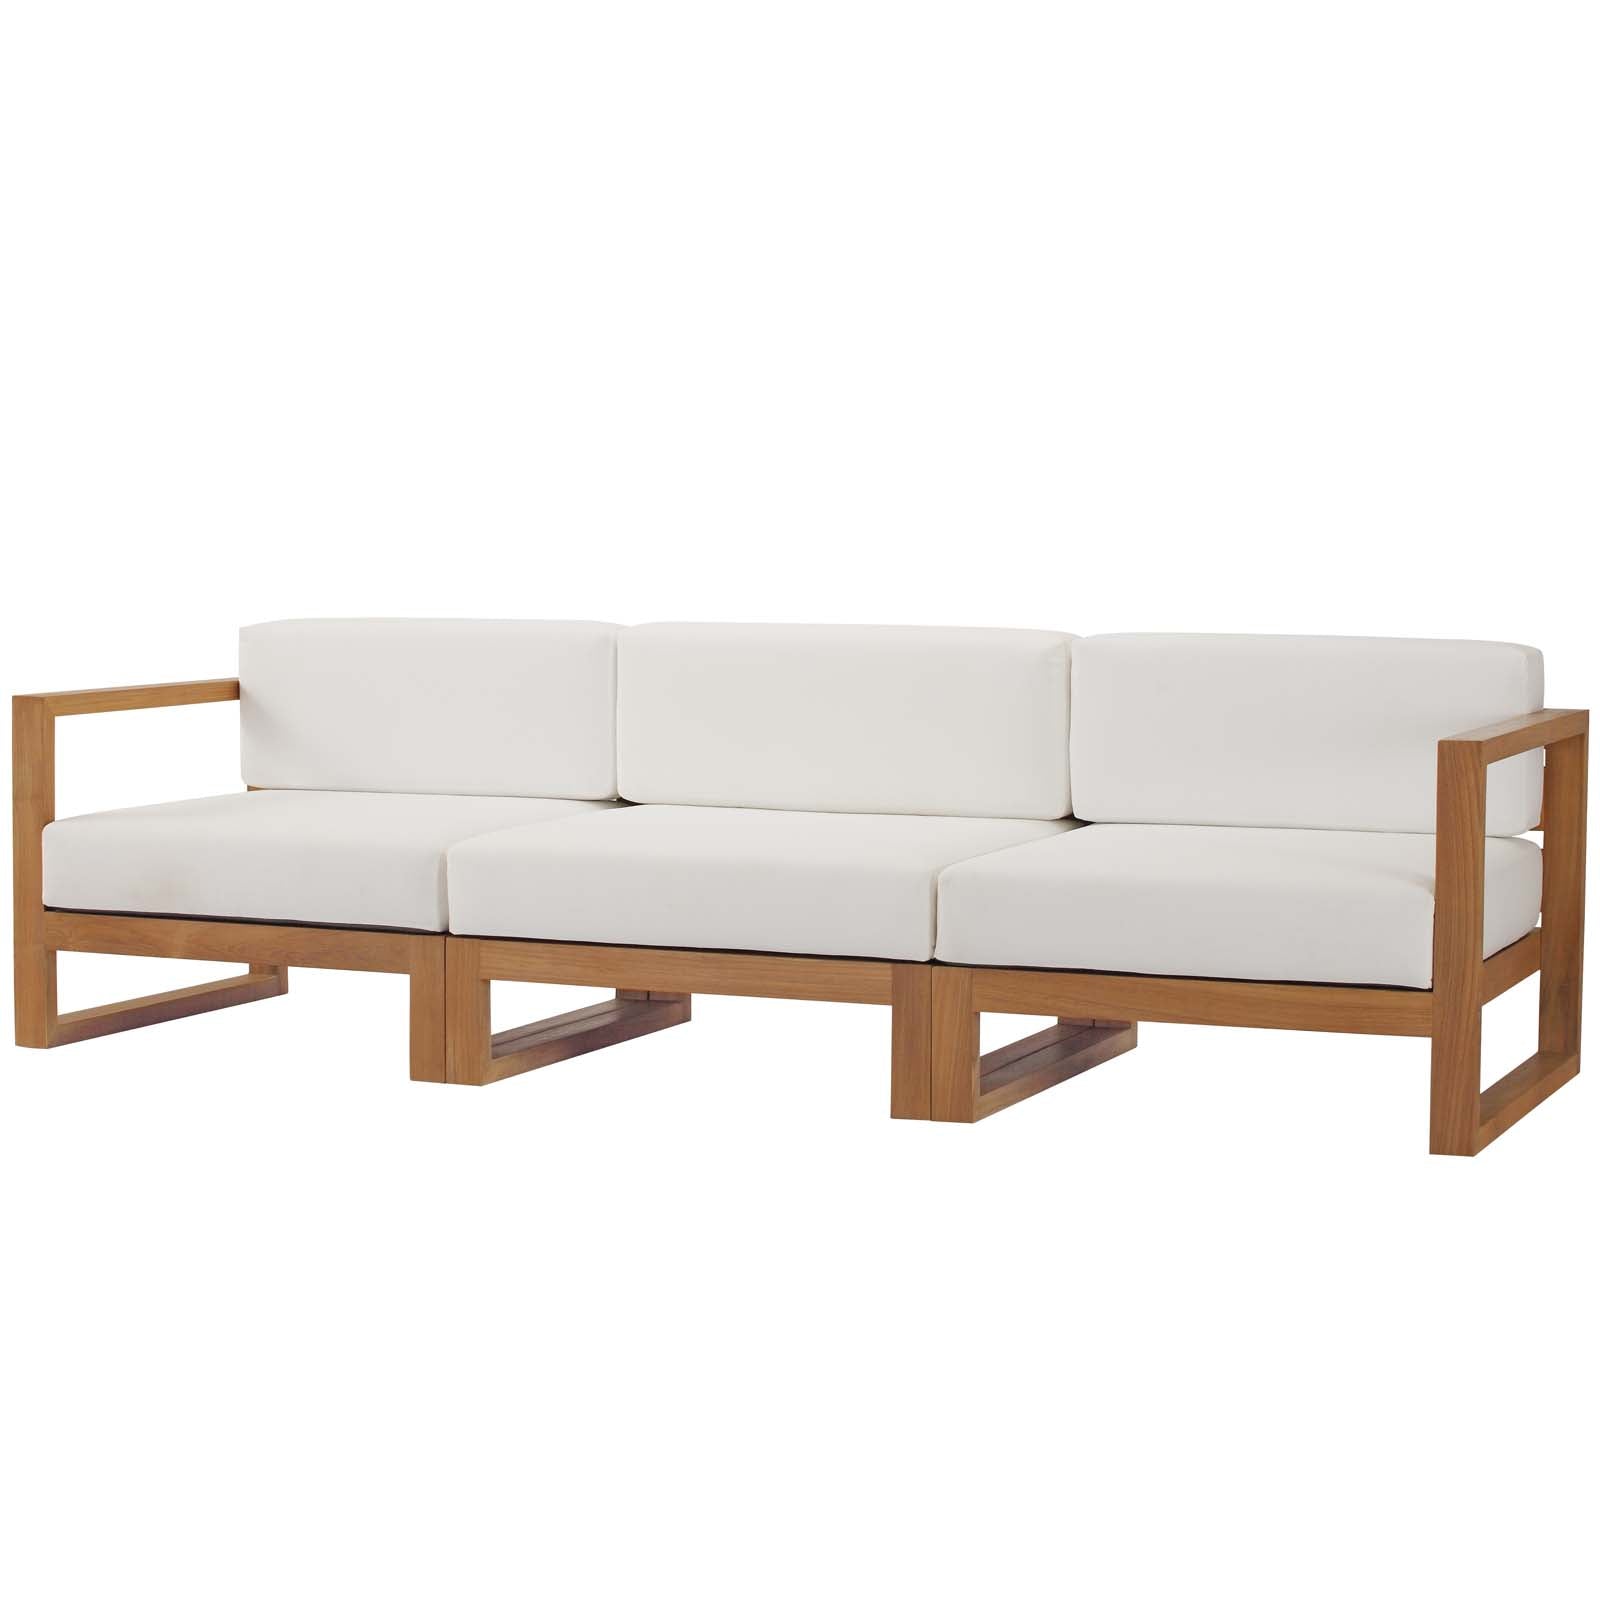 Modway Outdoor Conversation Sets - Upland Outdoor Patio Teak Wood 3 Piece Sectional Sofa Set Natural White